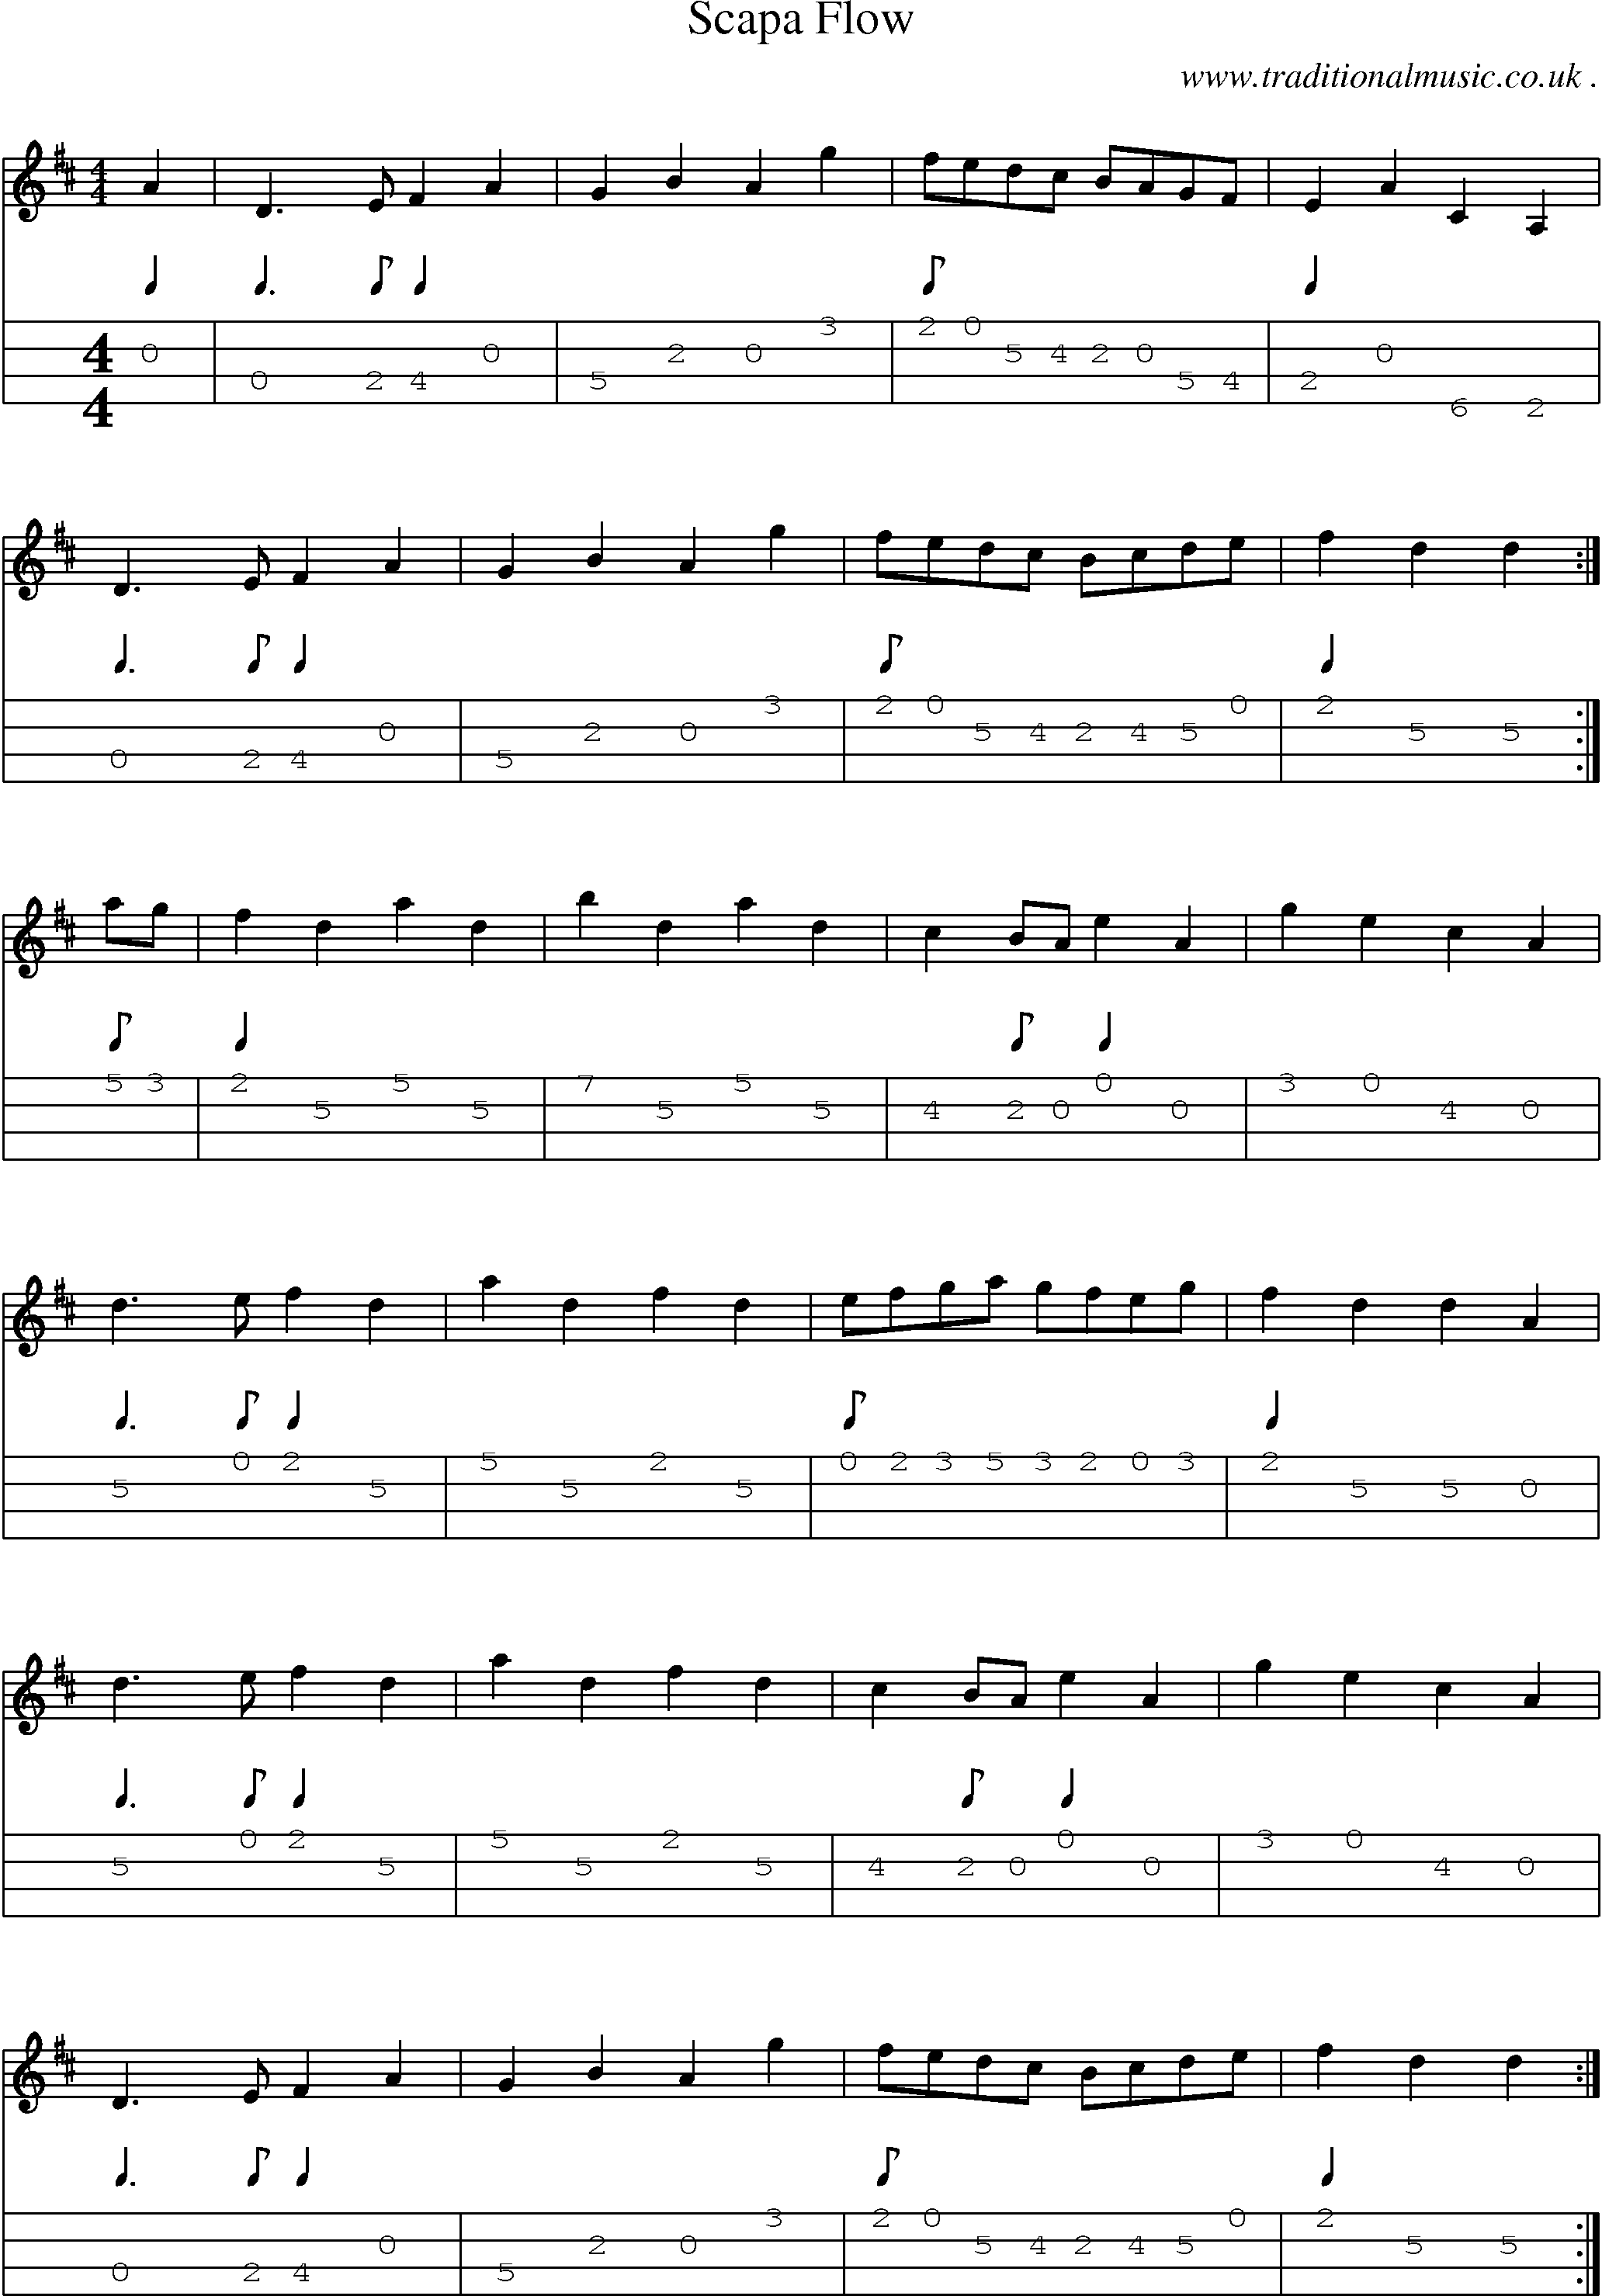 Sheet-music  score, Chords and Mandolin Tabs for Scapa Flow